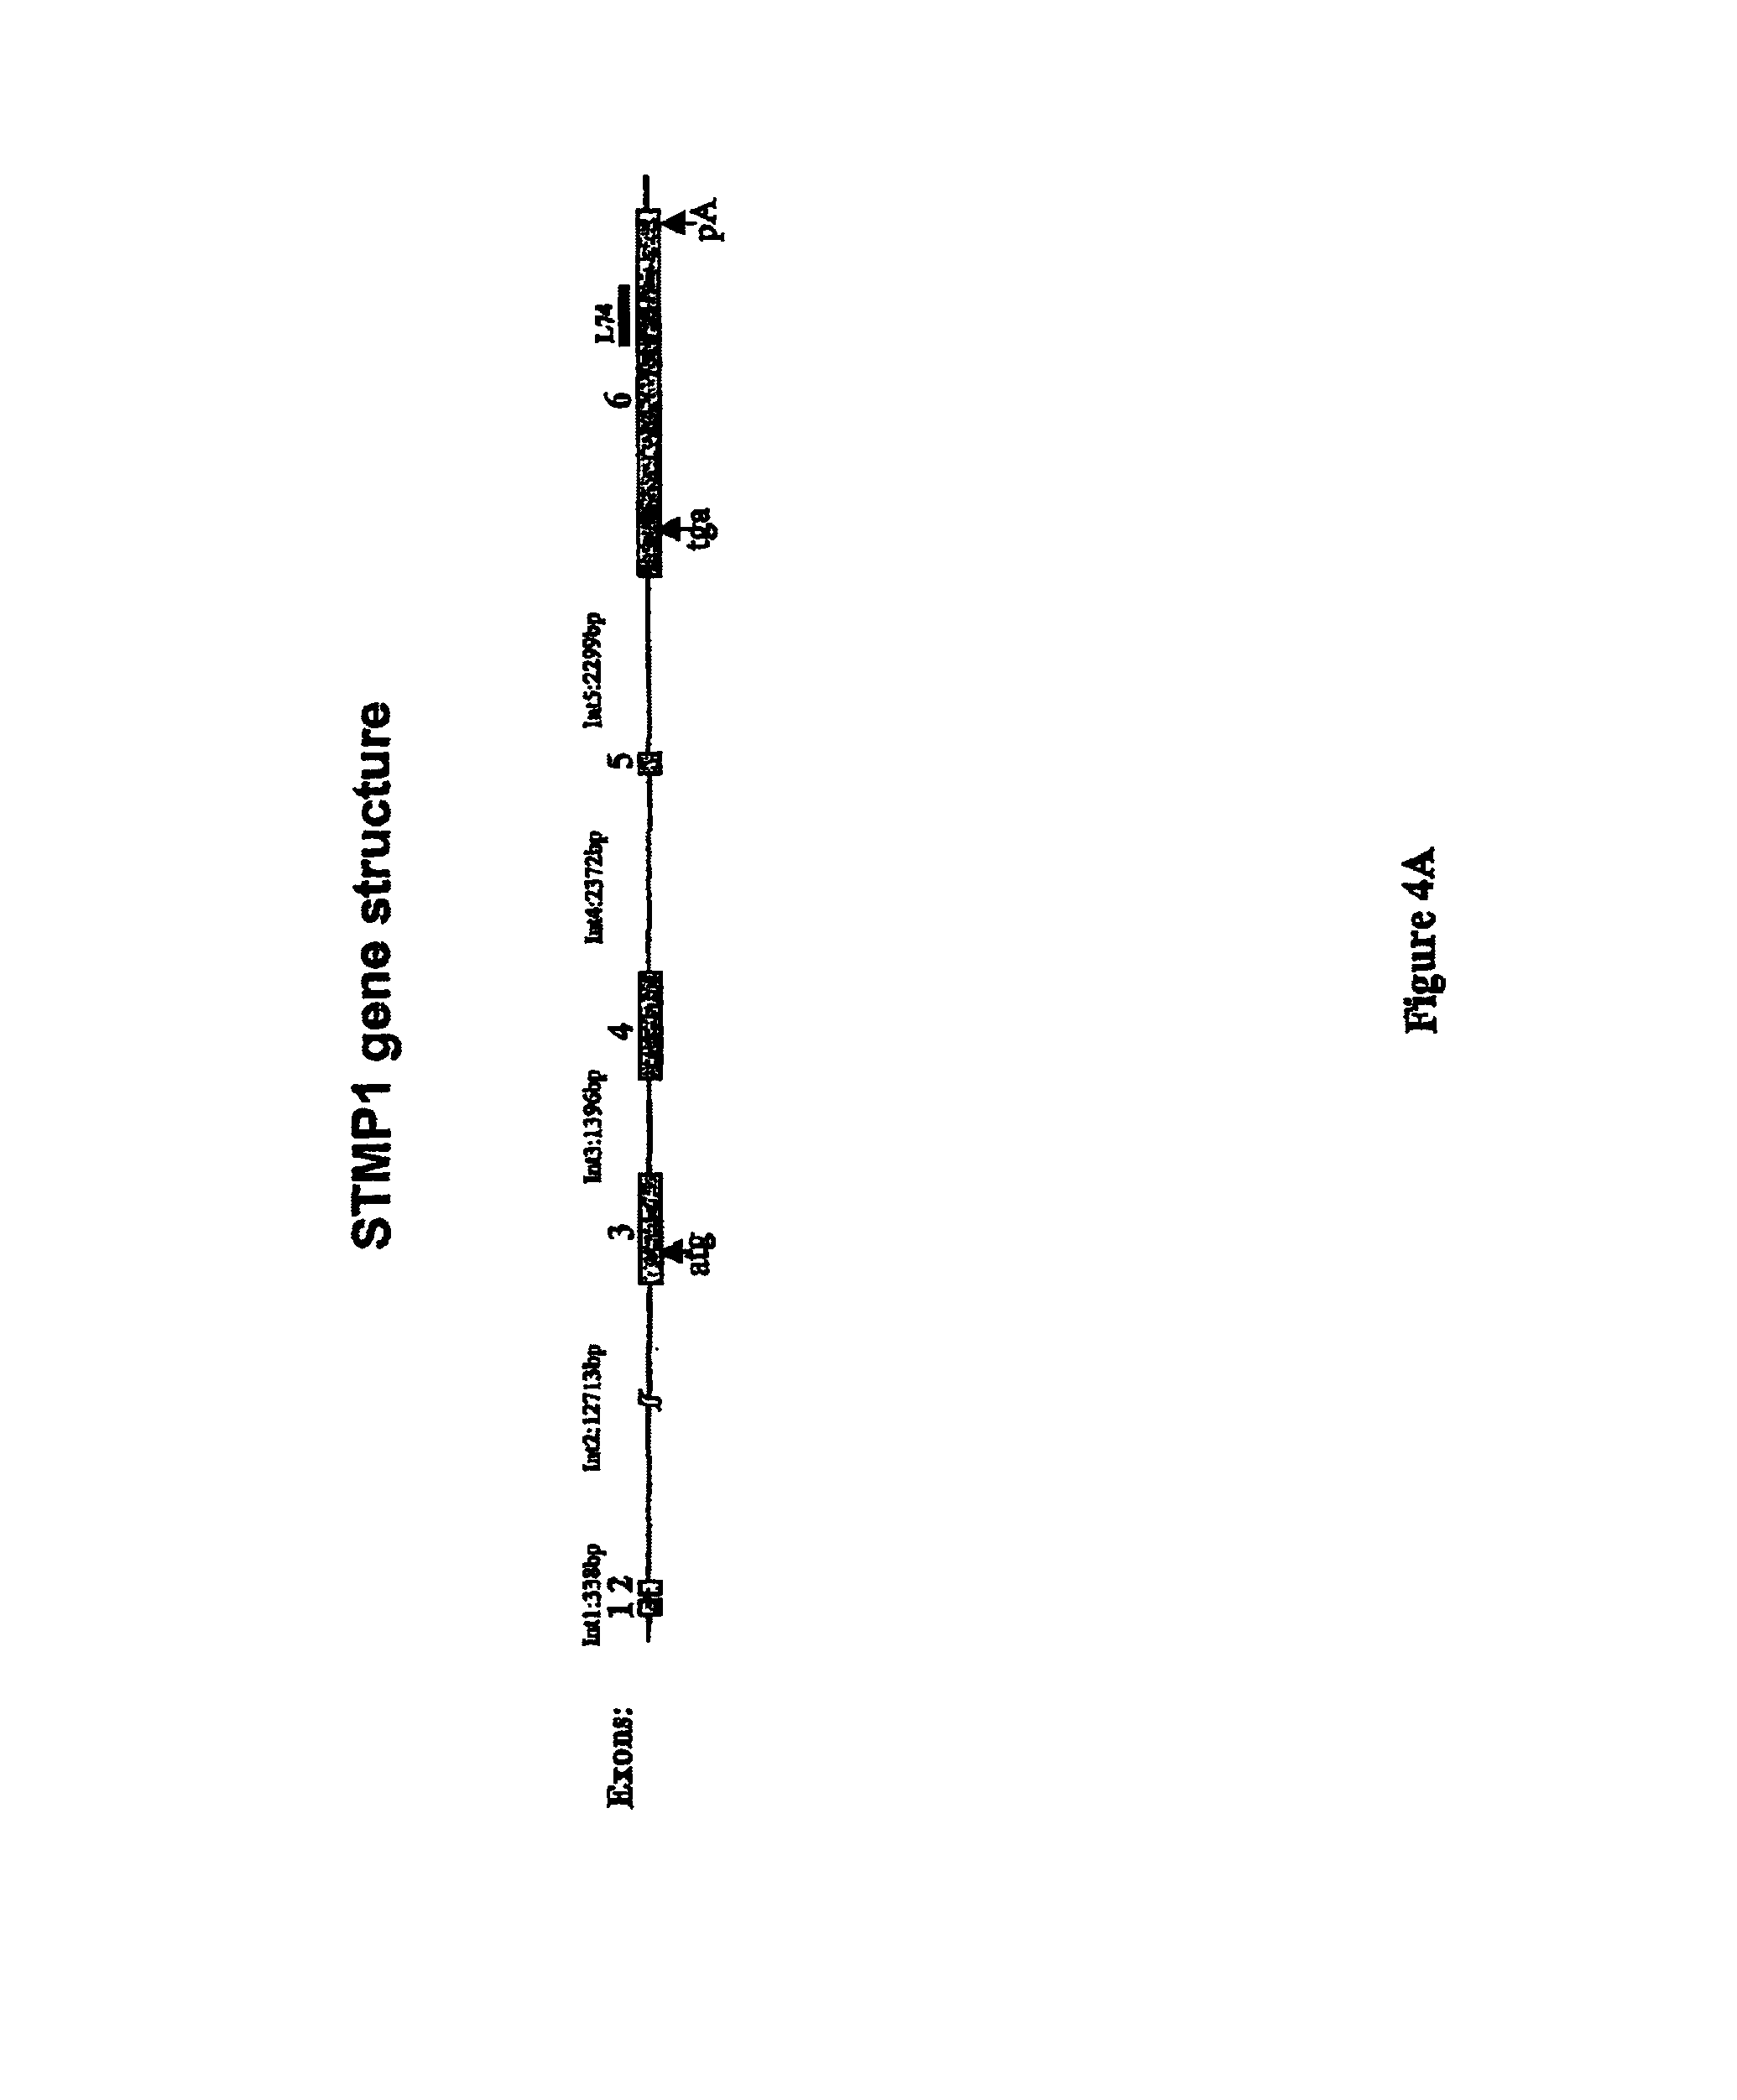 Prostate-specific or testis-specific nucleic acid molecules, polypeptides, and diagnostic and therapeutic methods